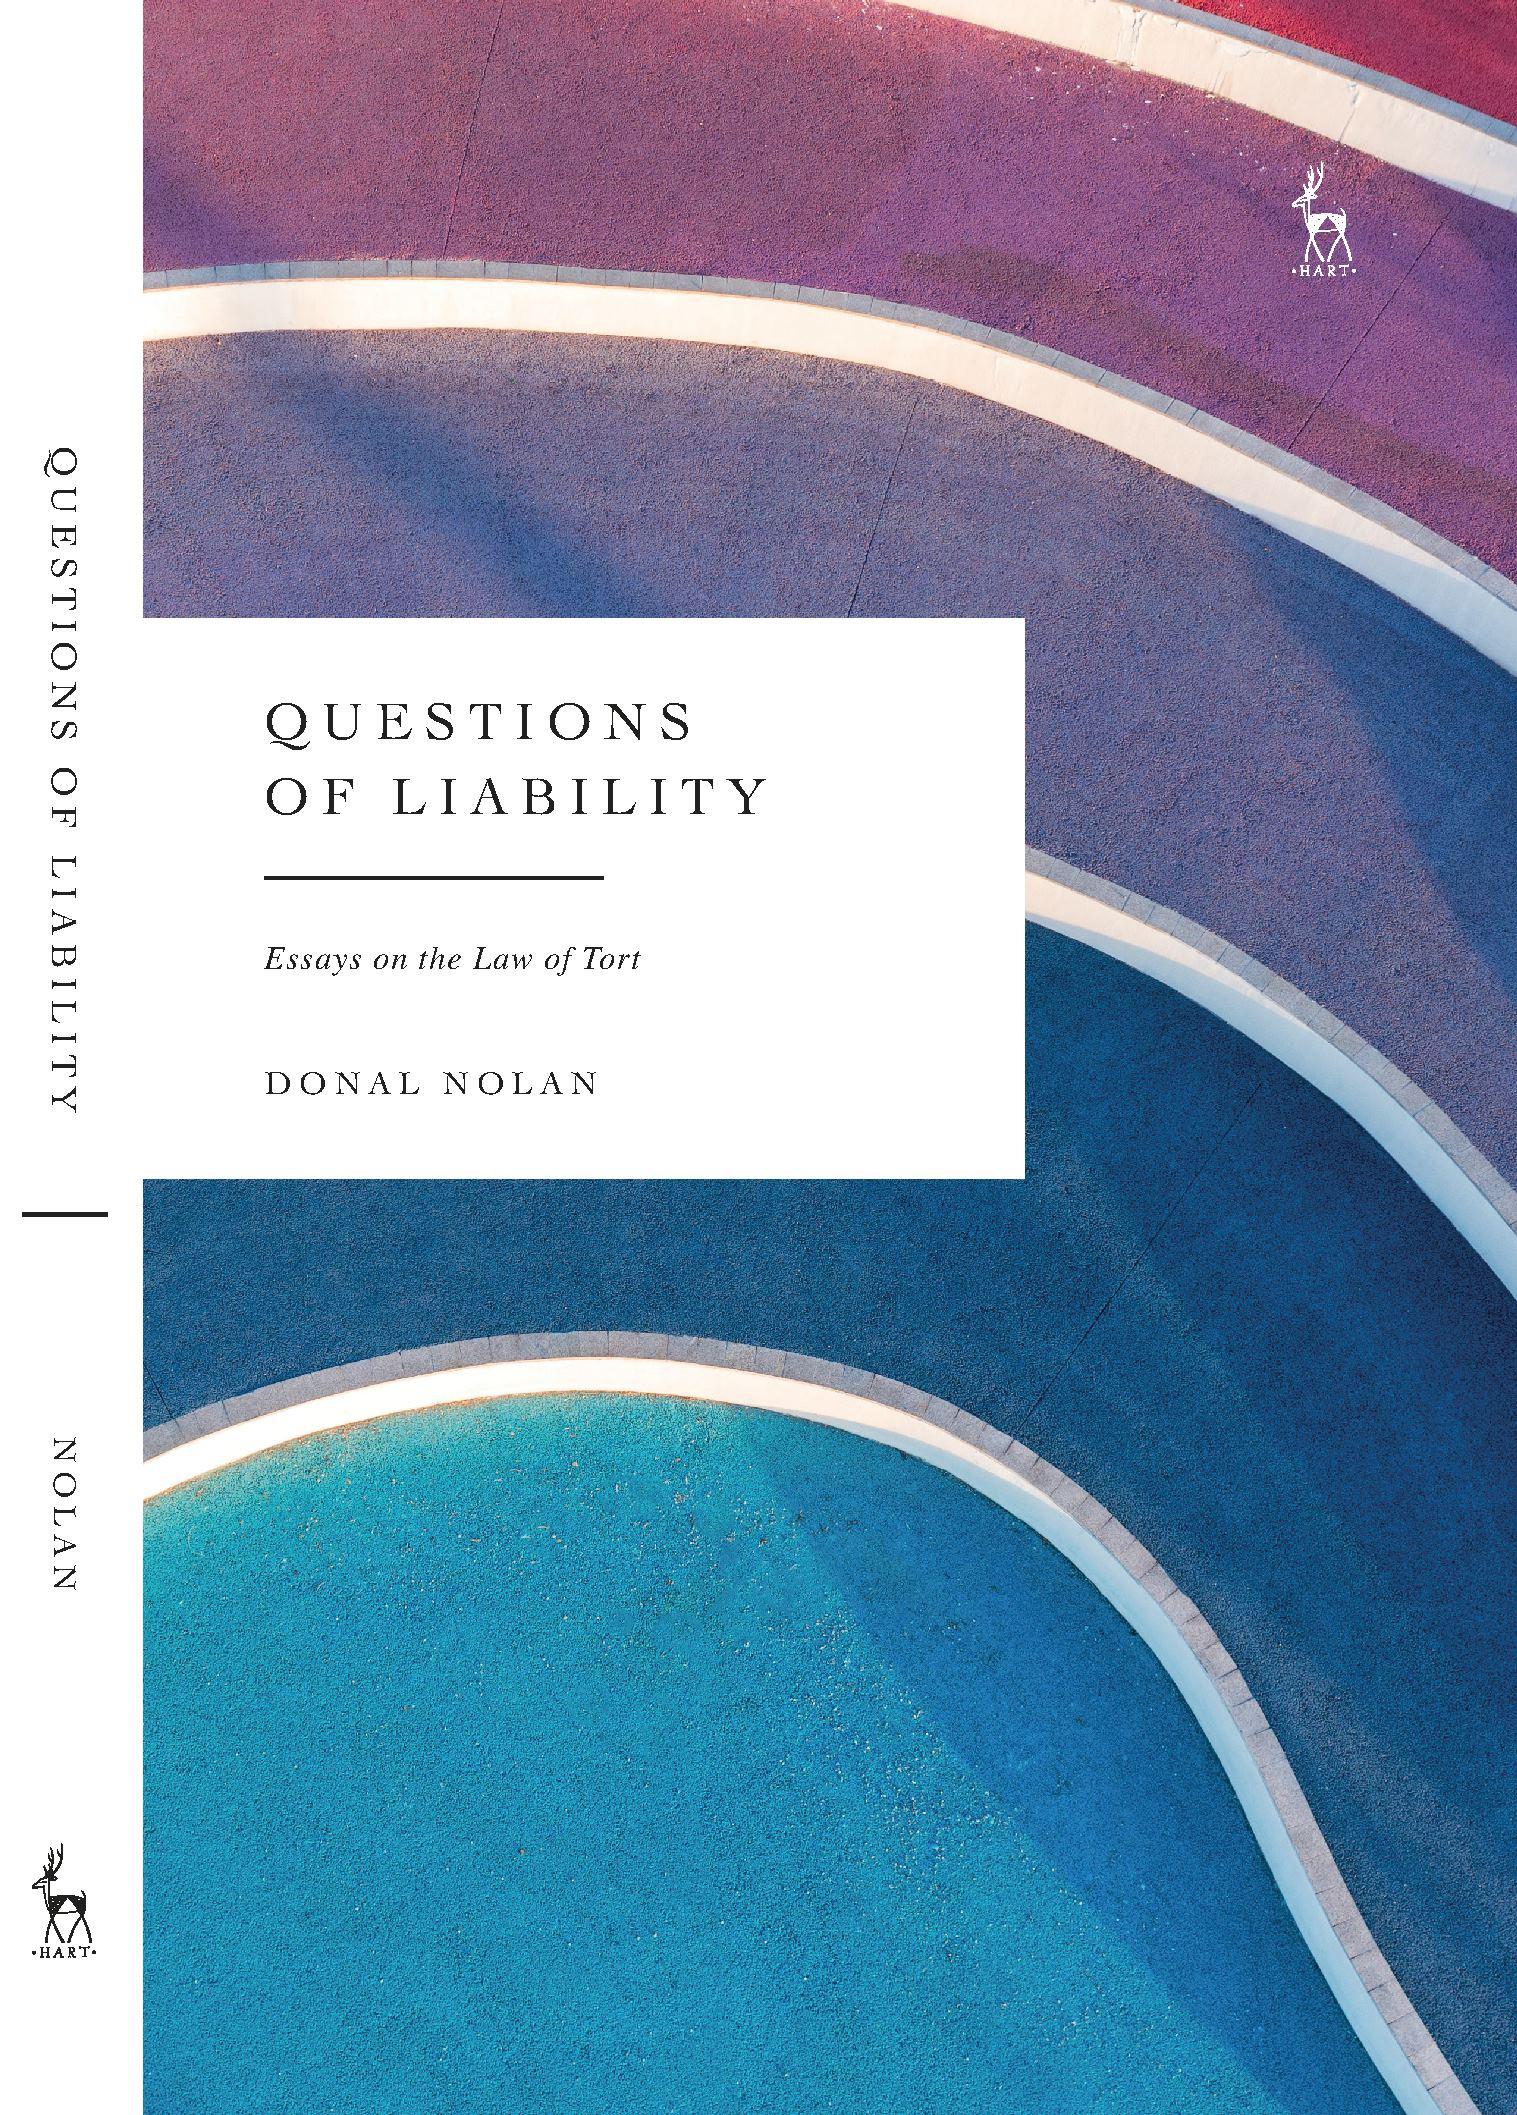 Questions of Liability book cover. Waves of blues, pinks and purples.